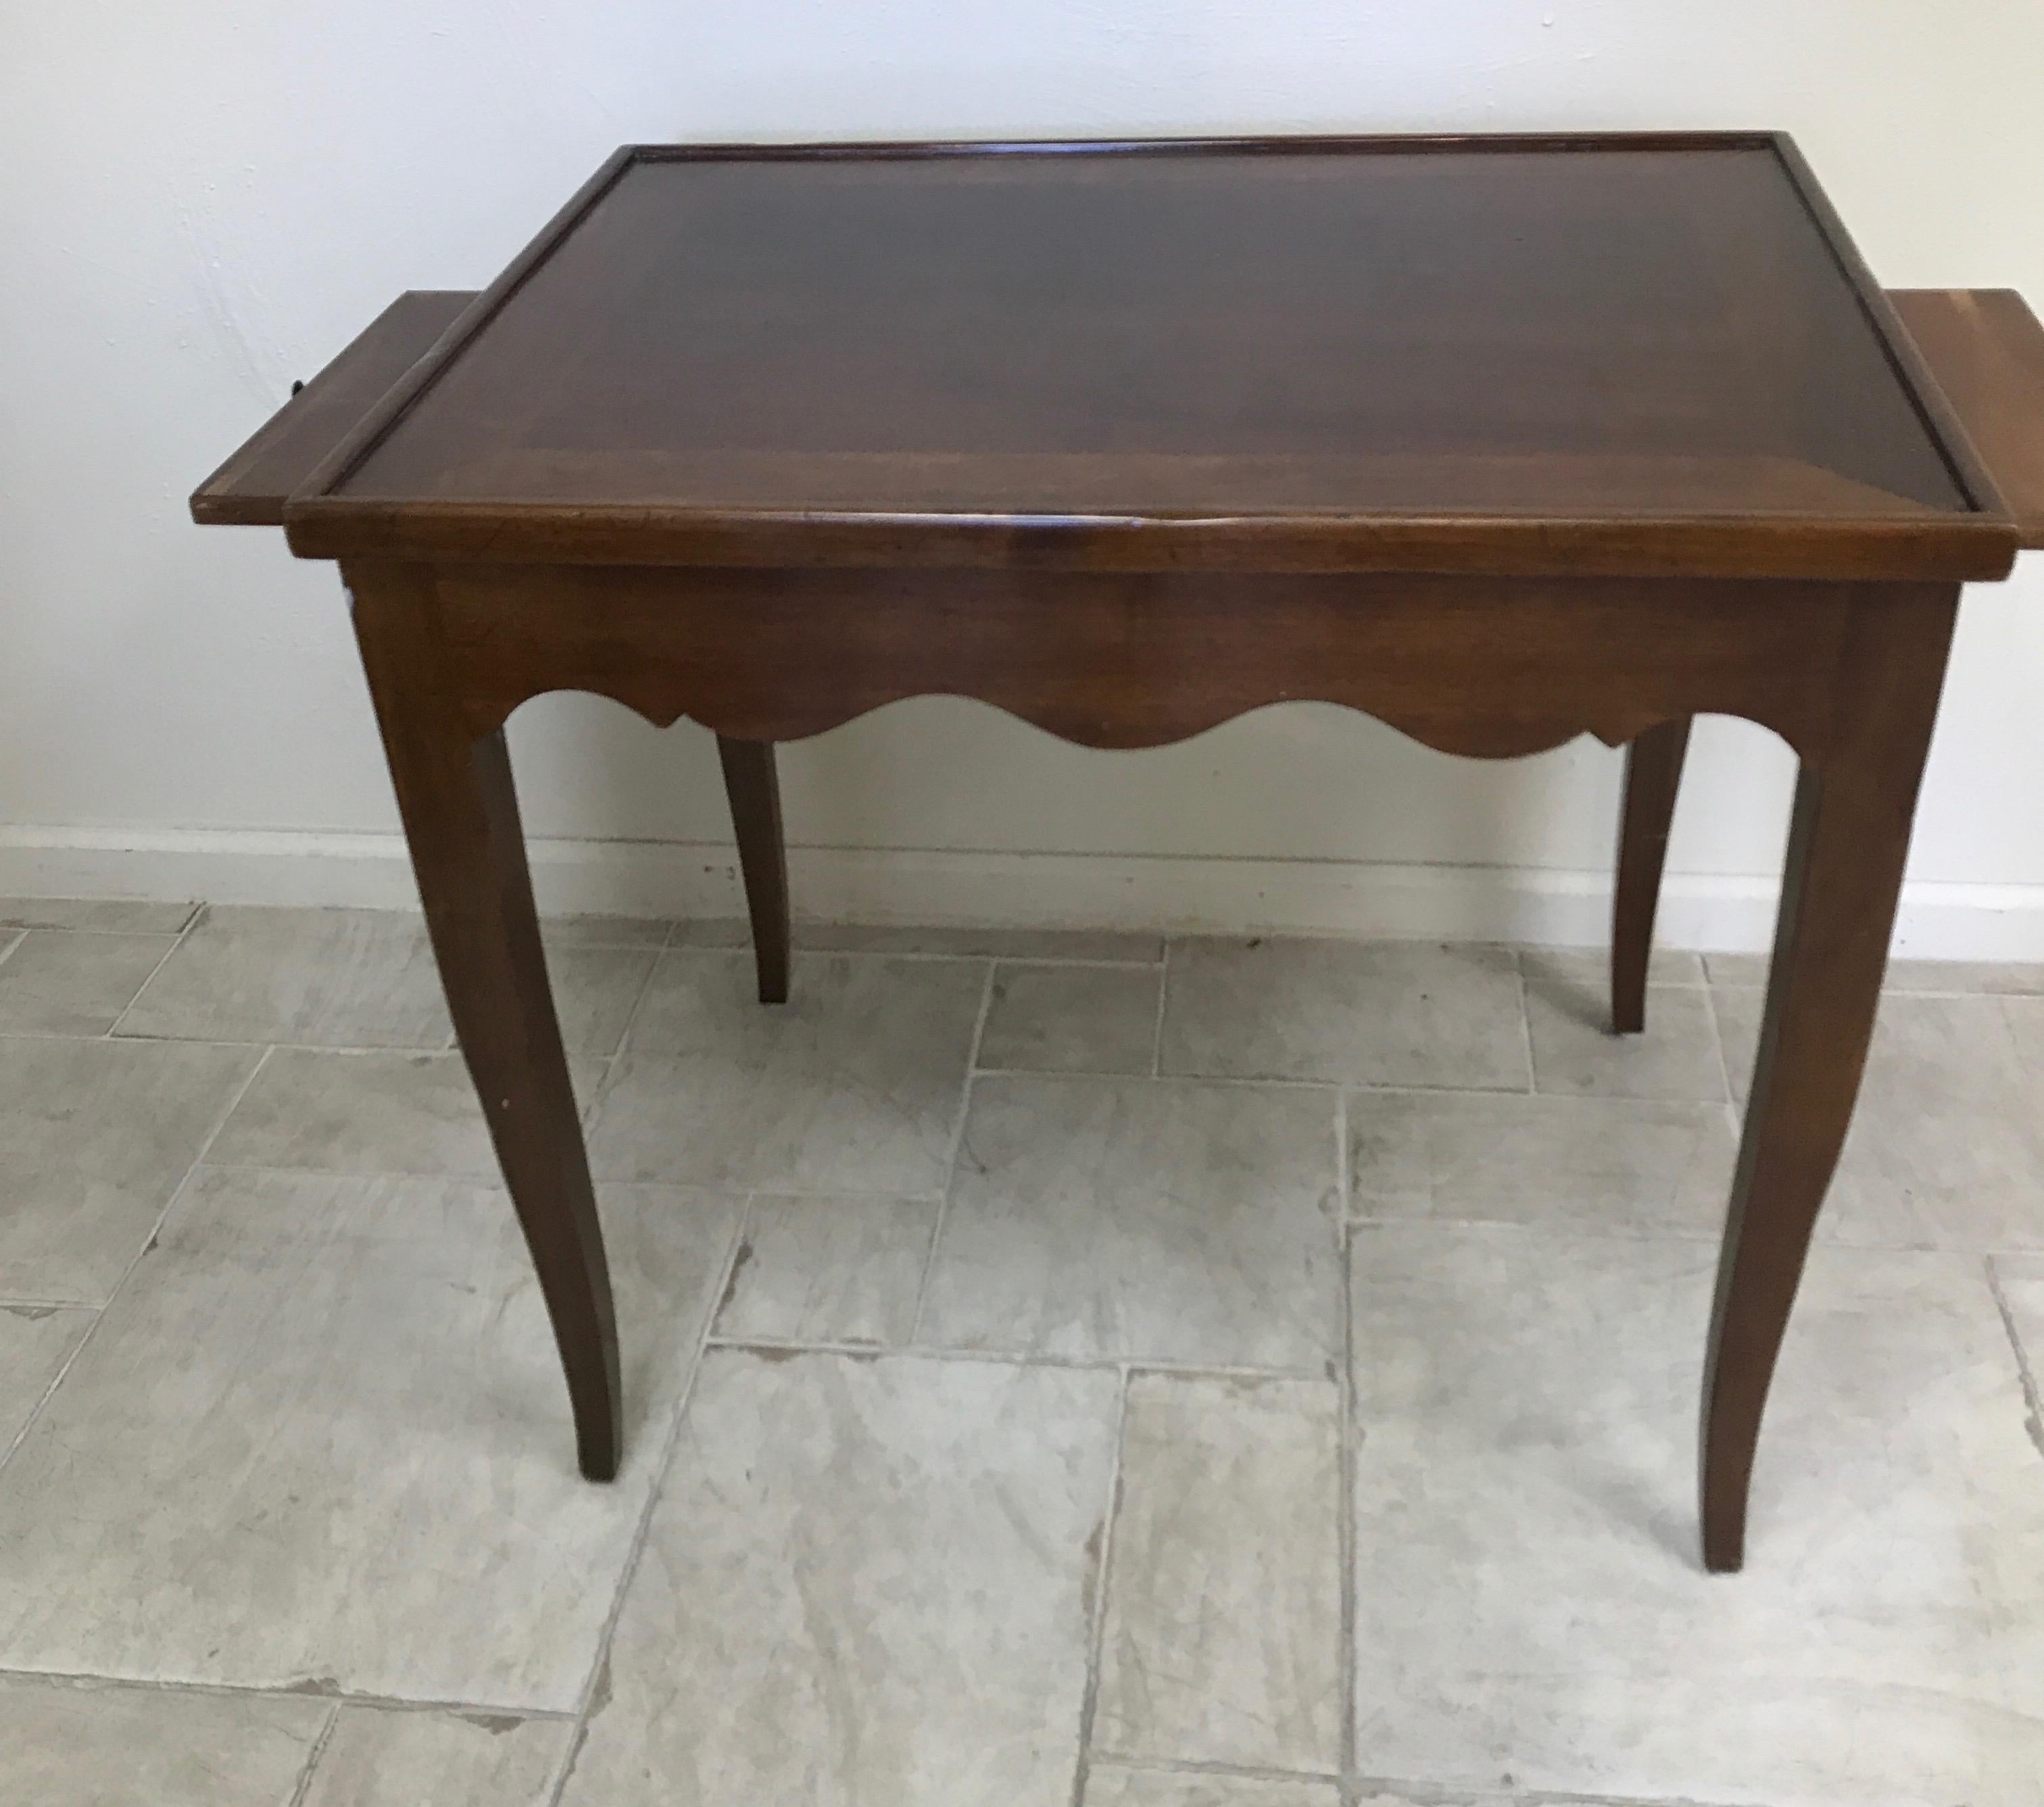 Louis XV style Italian walnut game table with flip top and side pull out extensions.
One side of top is plain and the other side is inlaid chess board.